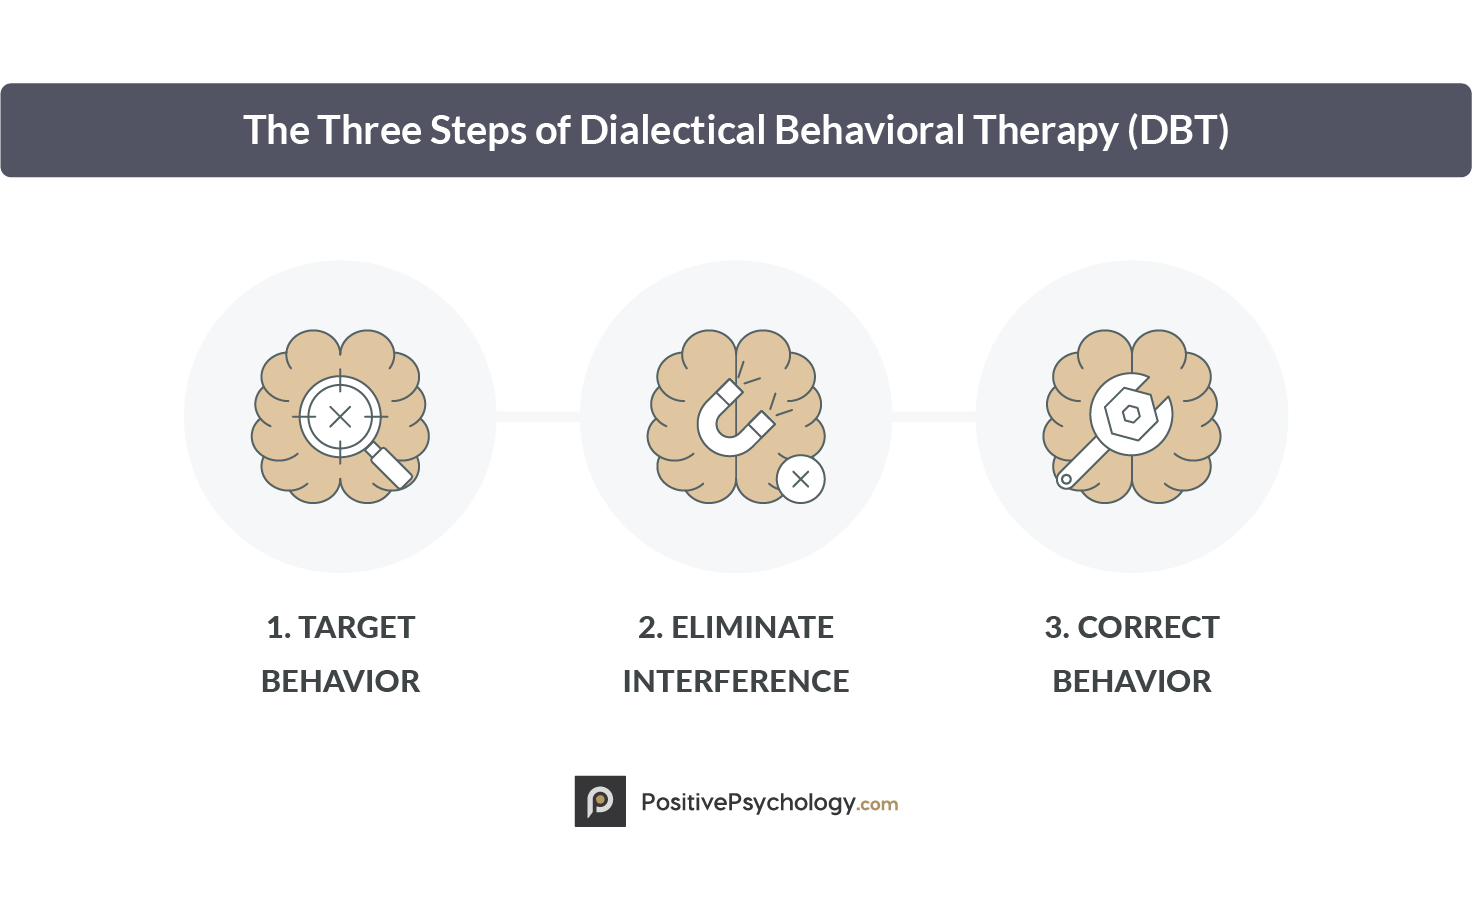 The Three Steps of Dialectical Behavioral Therapy (DBT)